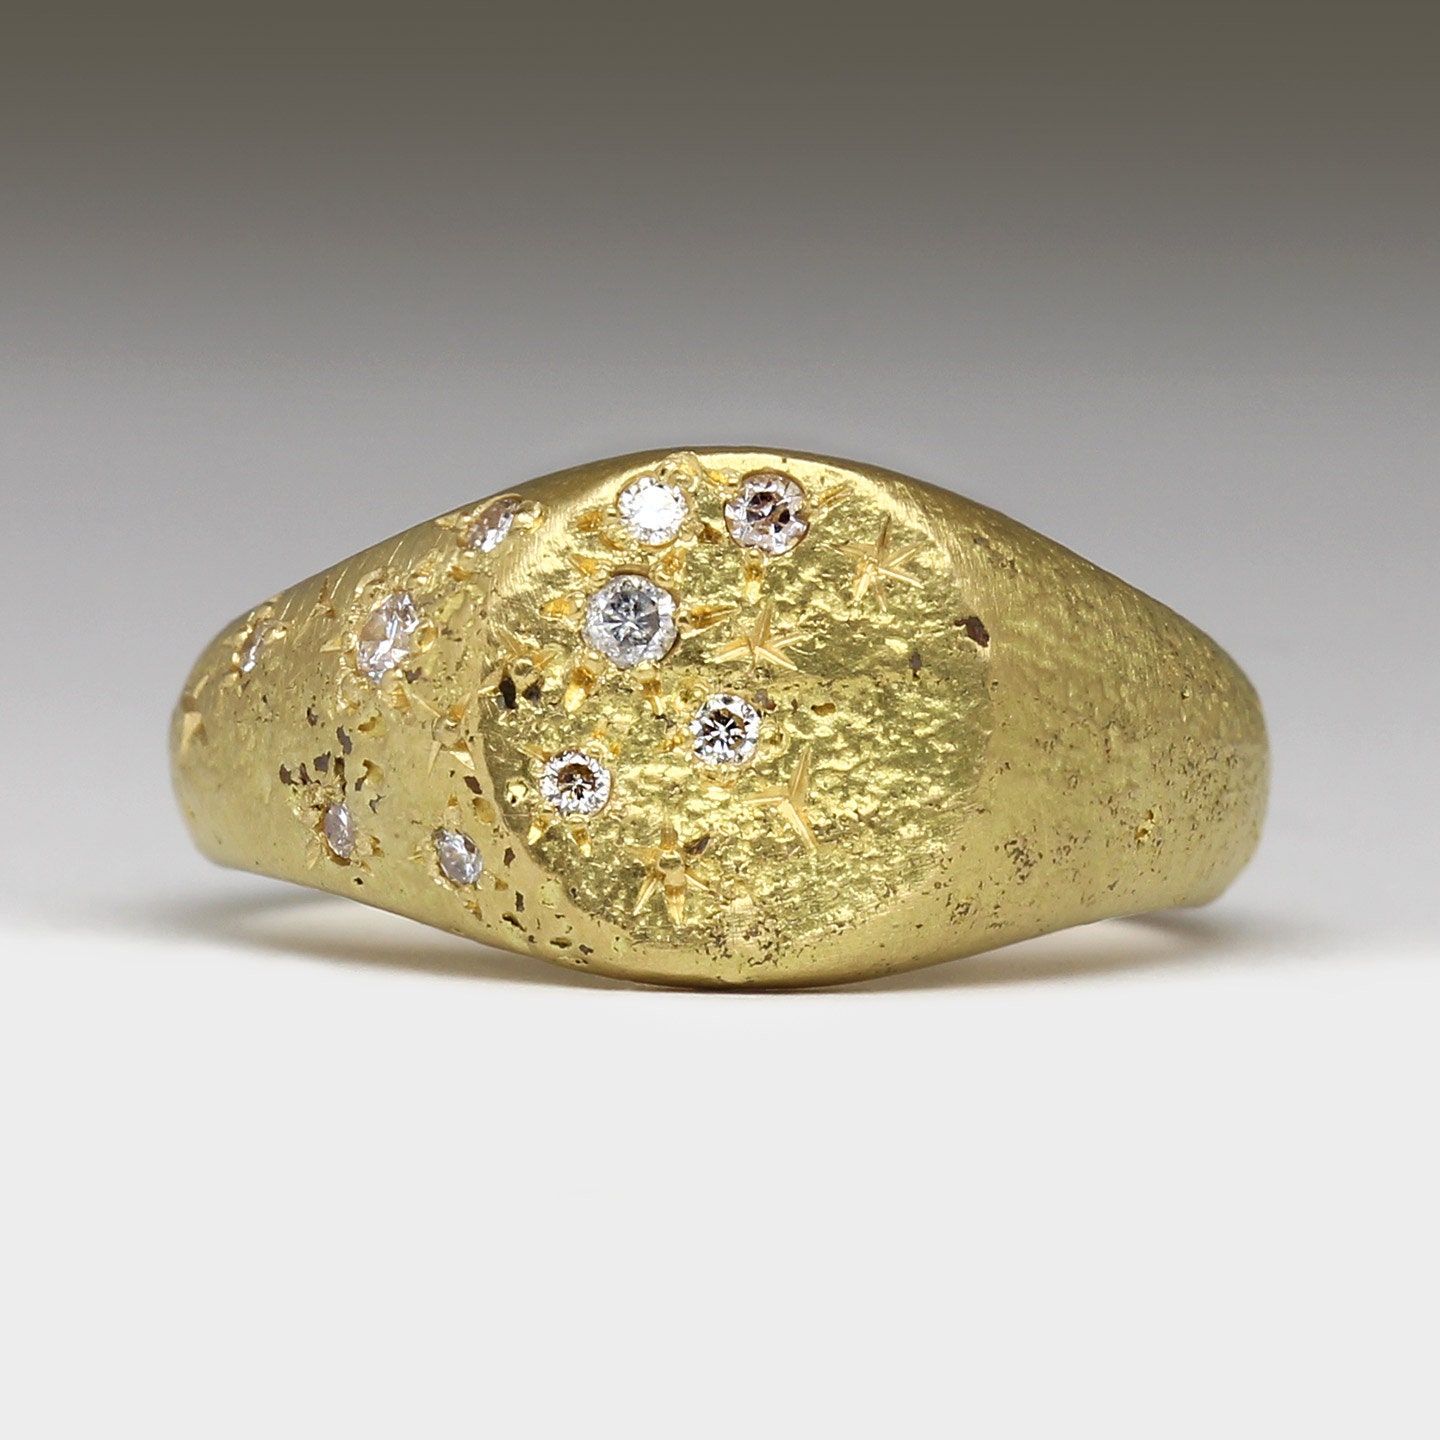 Diamond Encrusted Gold Signet Ring - Cast in Beach Sand Recycled 18Ct & Reclaimed Diamonds Handmade Cornwall By Justin Duance